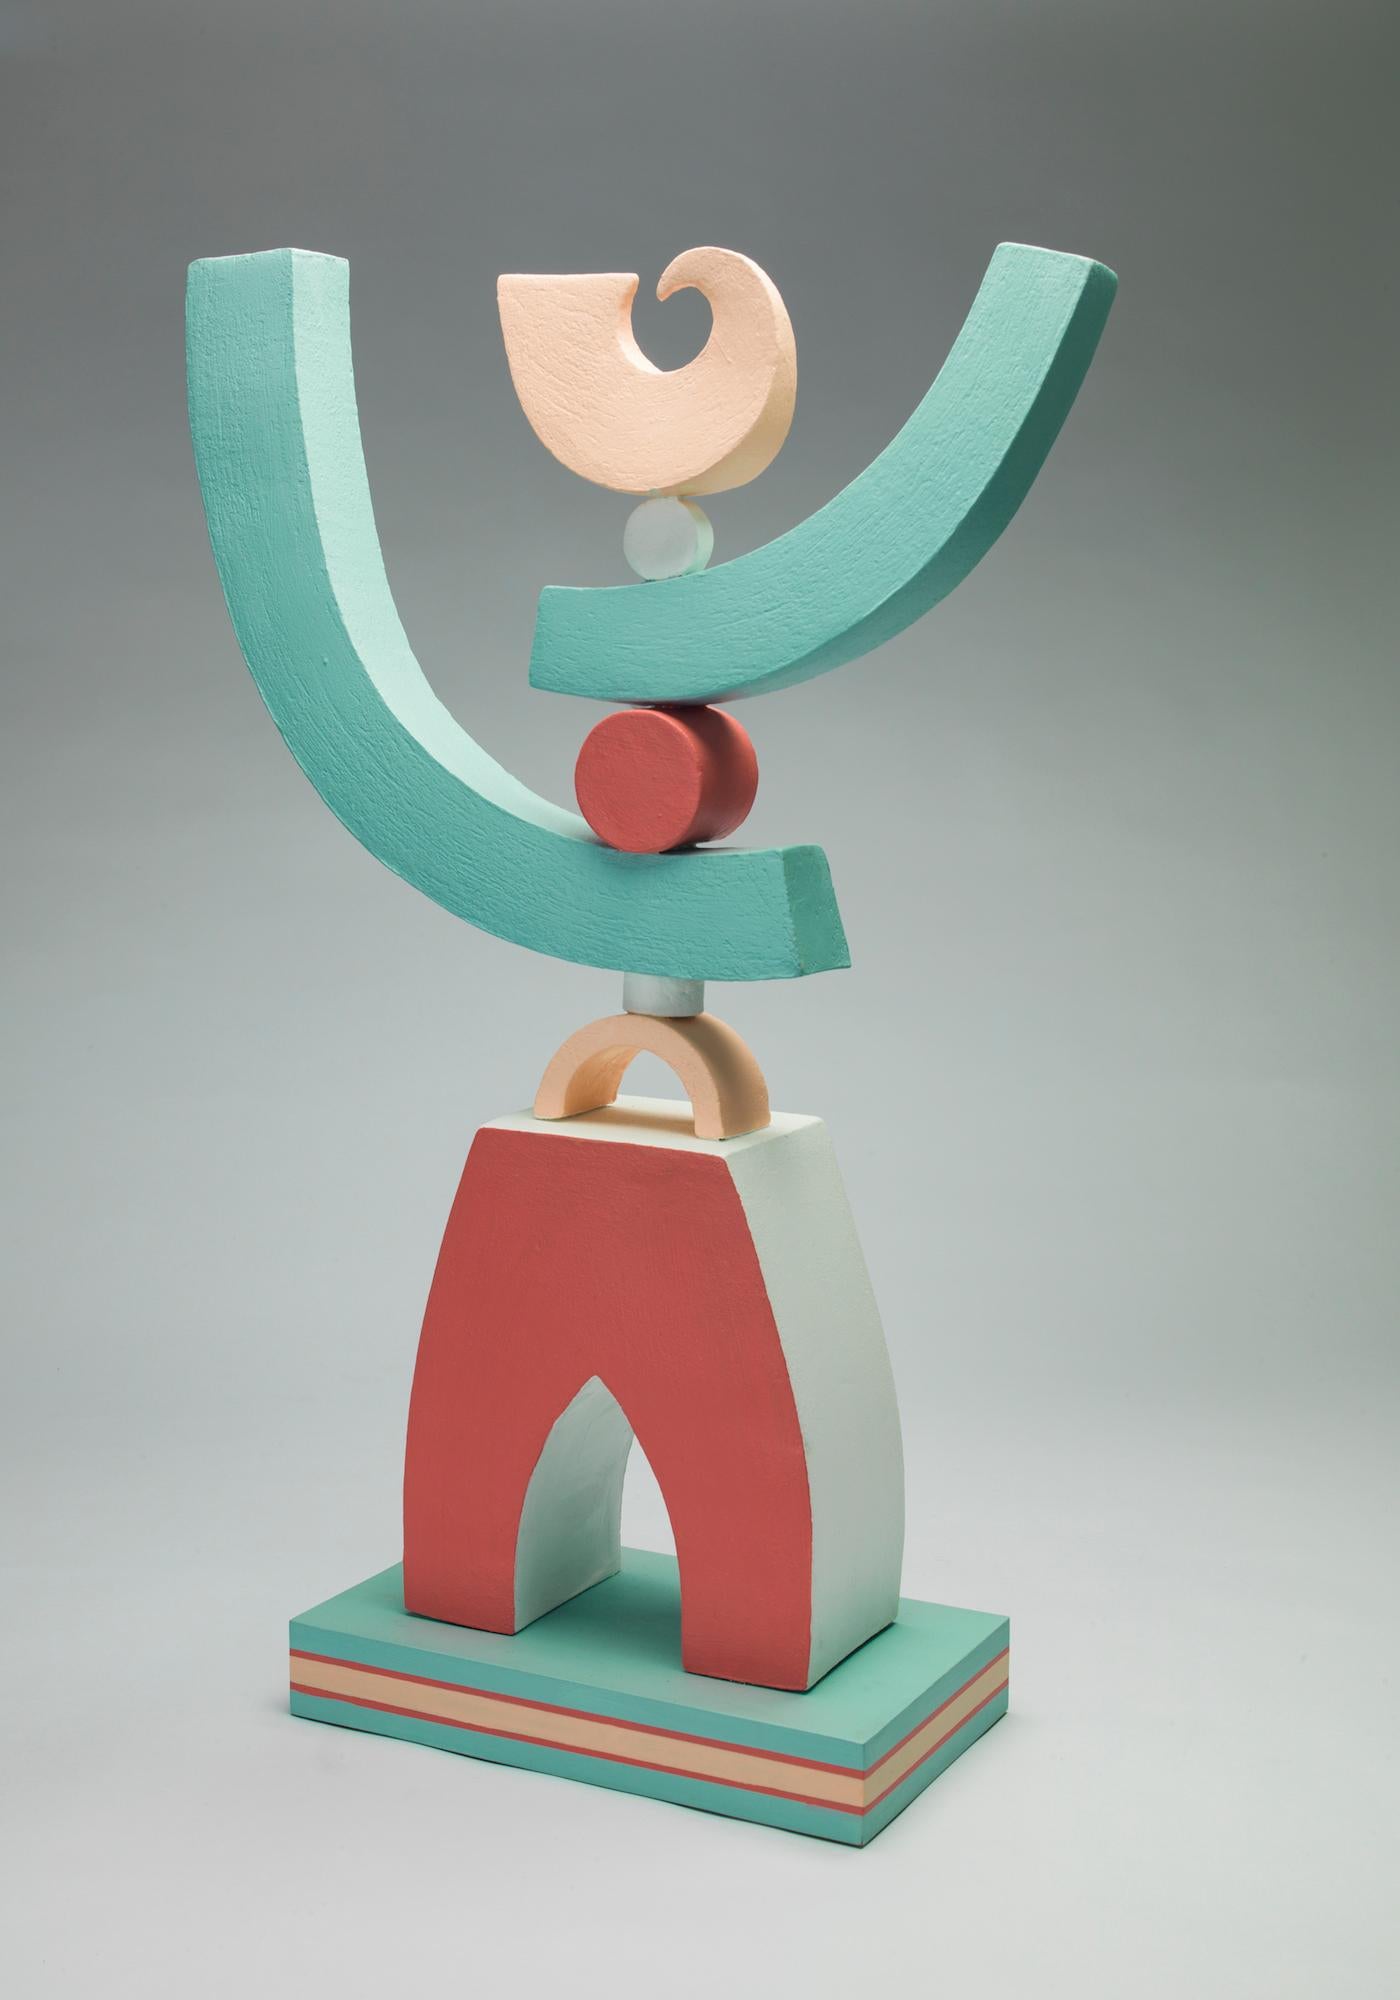 Signal by Patricia Volk - Abstract ceramic sculpture, painted clay